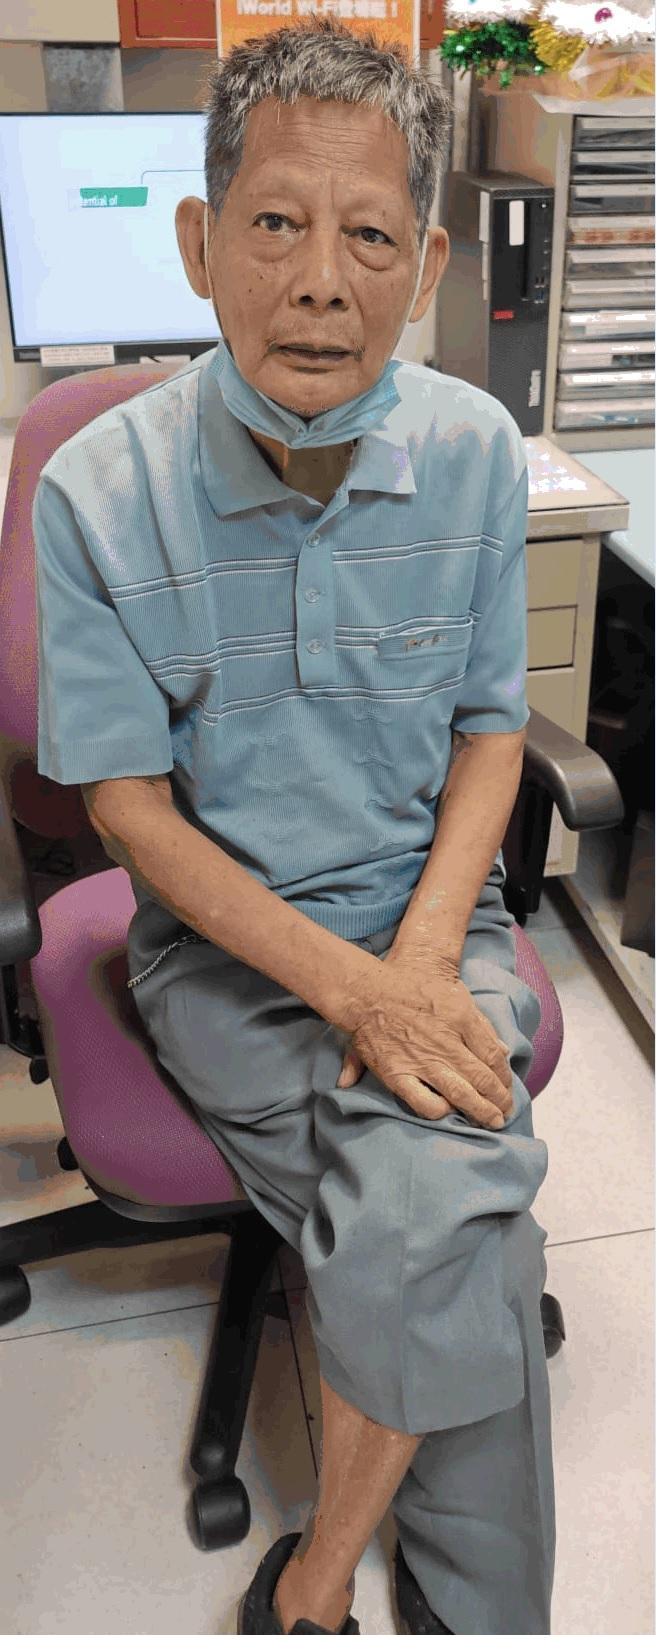 Kwan Tsan-sang, aged 82, is about 1.65 metres tall, 62 kilograms in weight and of thin build. He has a long face with yellow complexion and short grey and white hair. He was last seen wearing a grey and white short-sleeved polo shirt, grey trousers and black shoes.